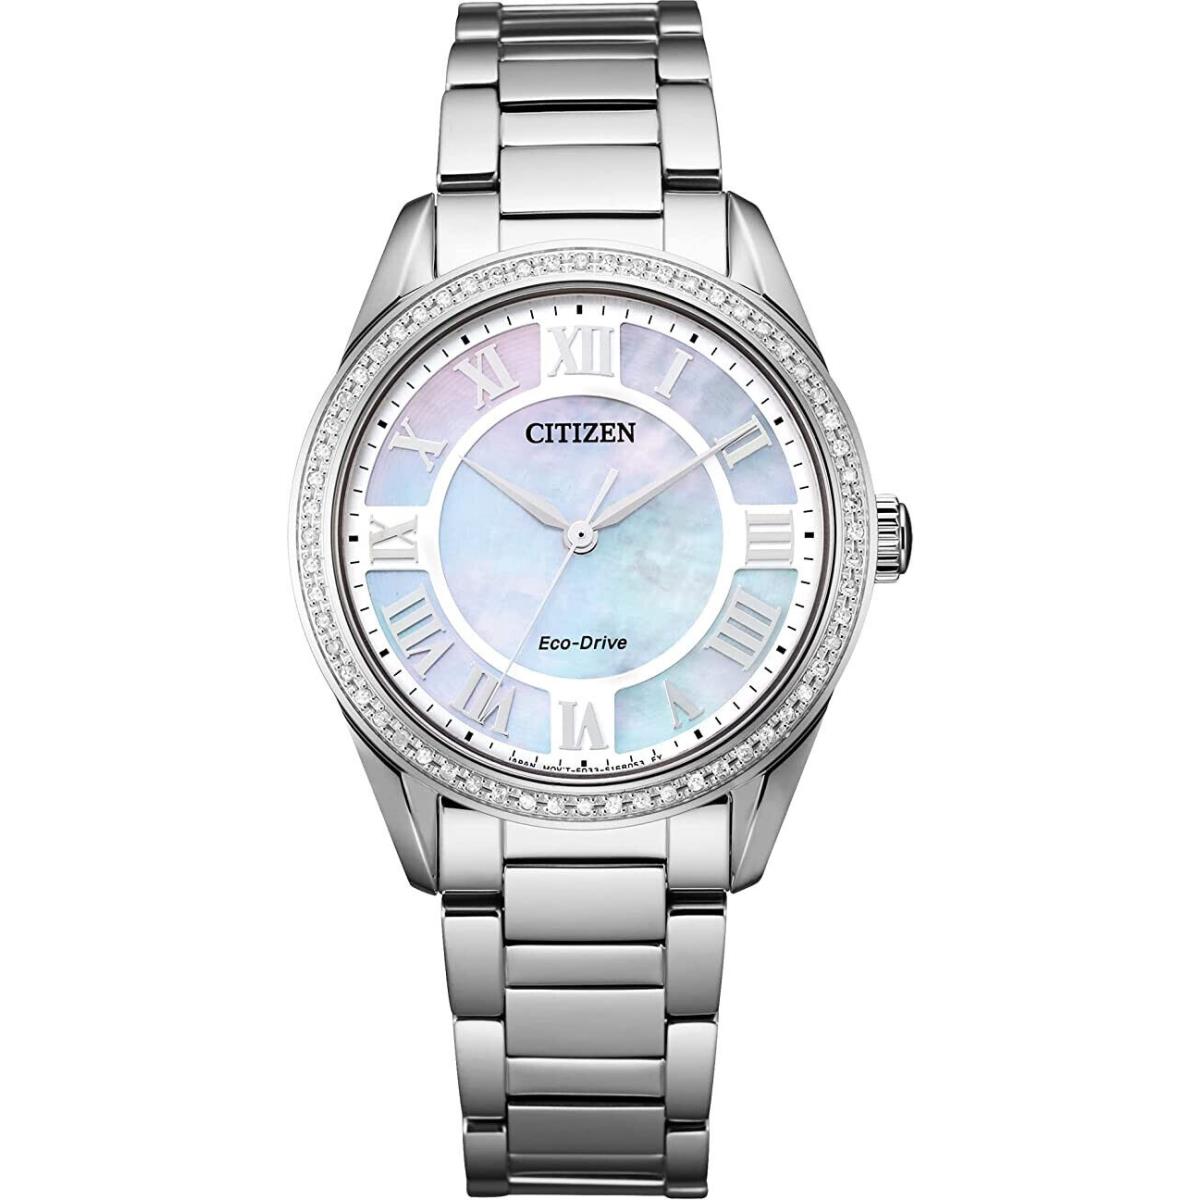 Citizen EM0880-54D Arezzo Mother-of-pearl Dial Diamond Eco-drive Watch - Dial: , Band: Silver, Bezel: Silver